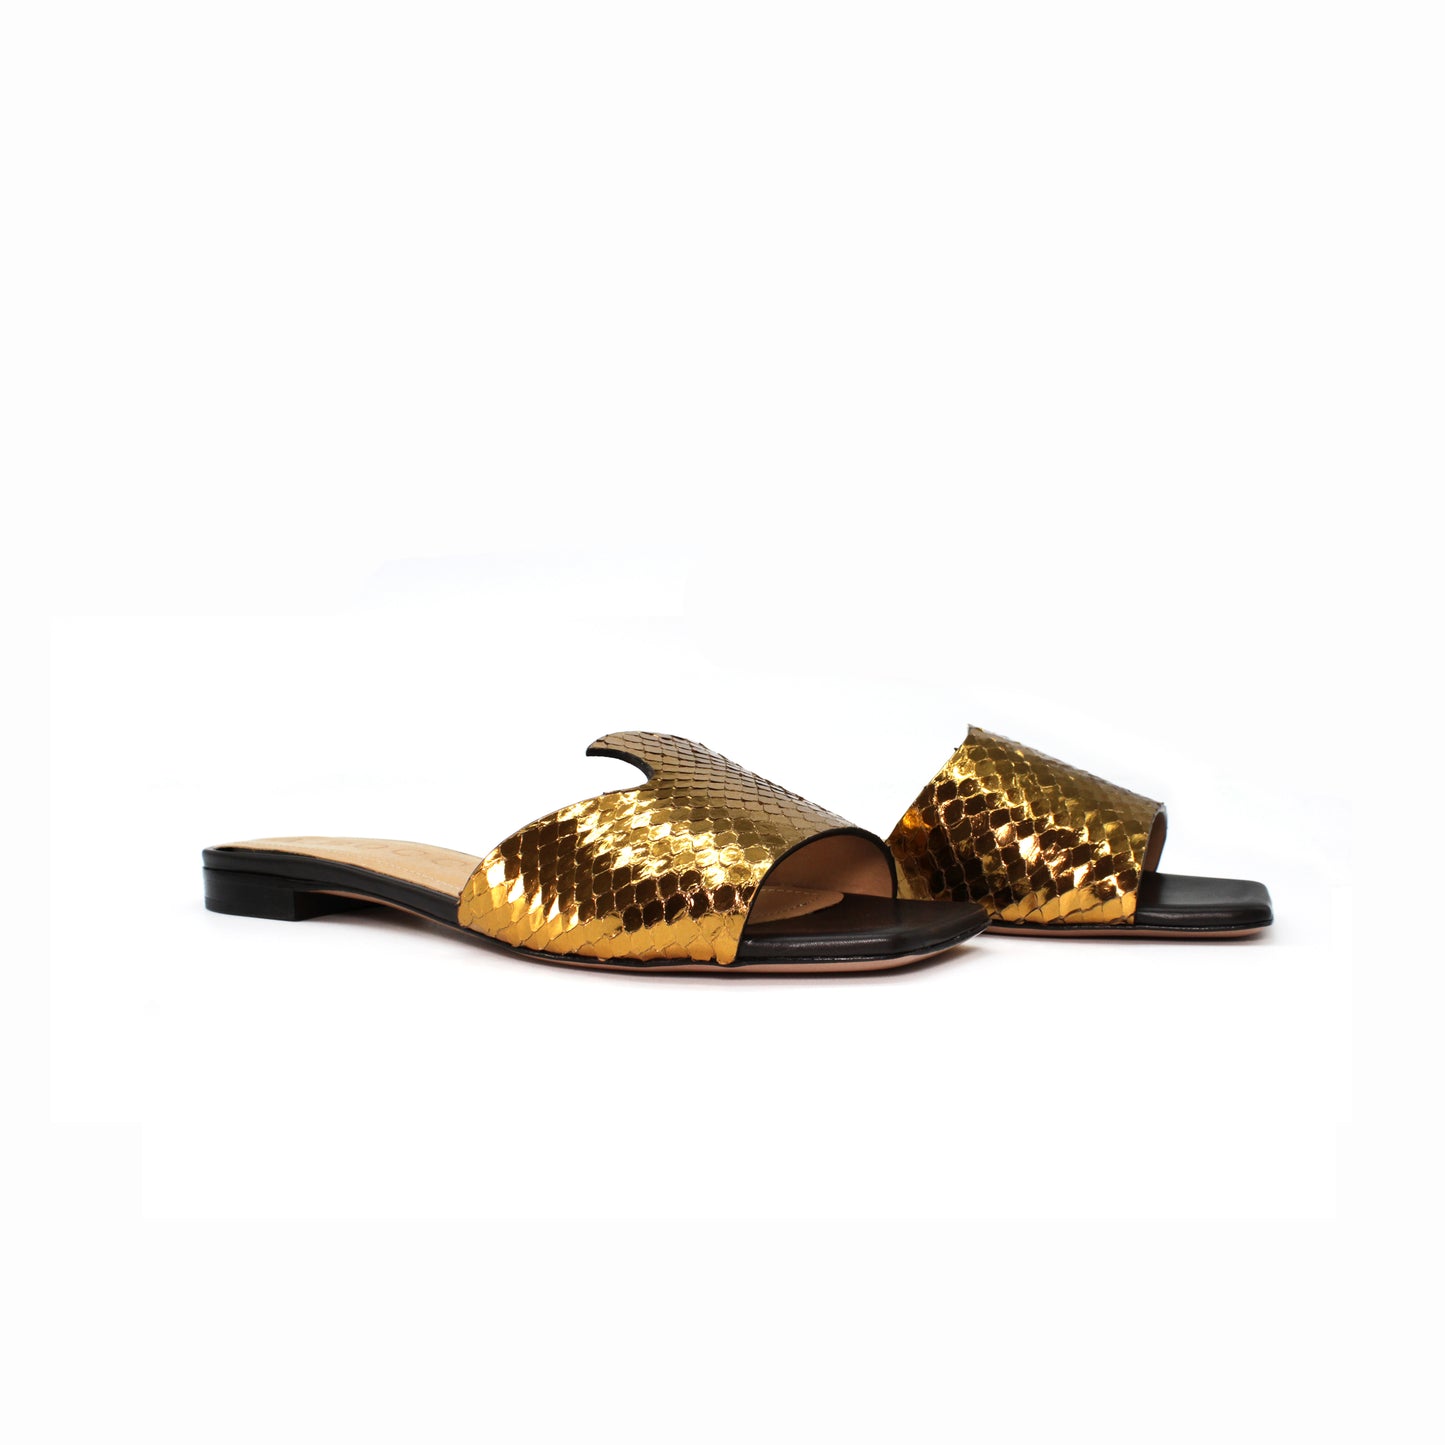 A.Bocca Slide in bronze-colored laminated leather